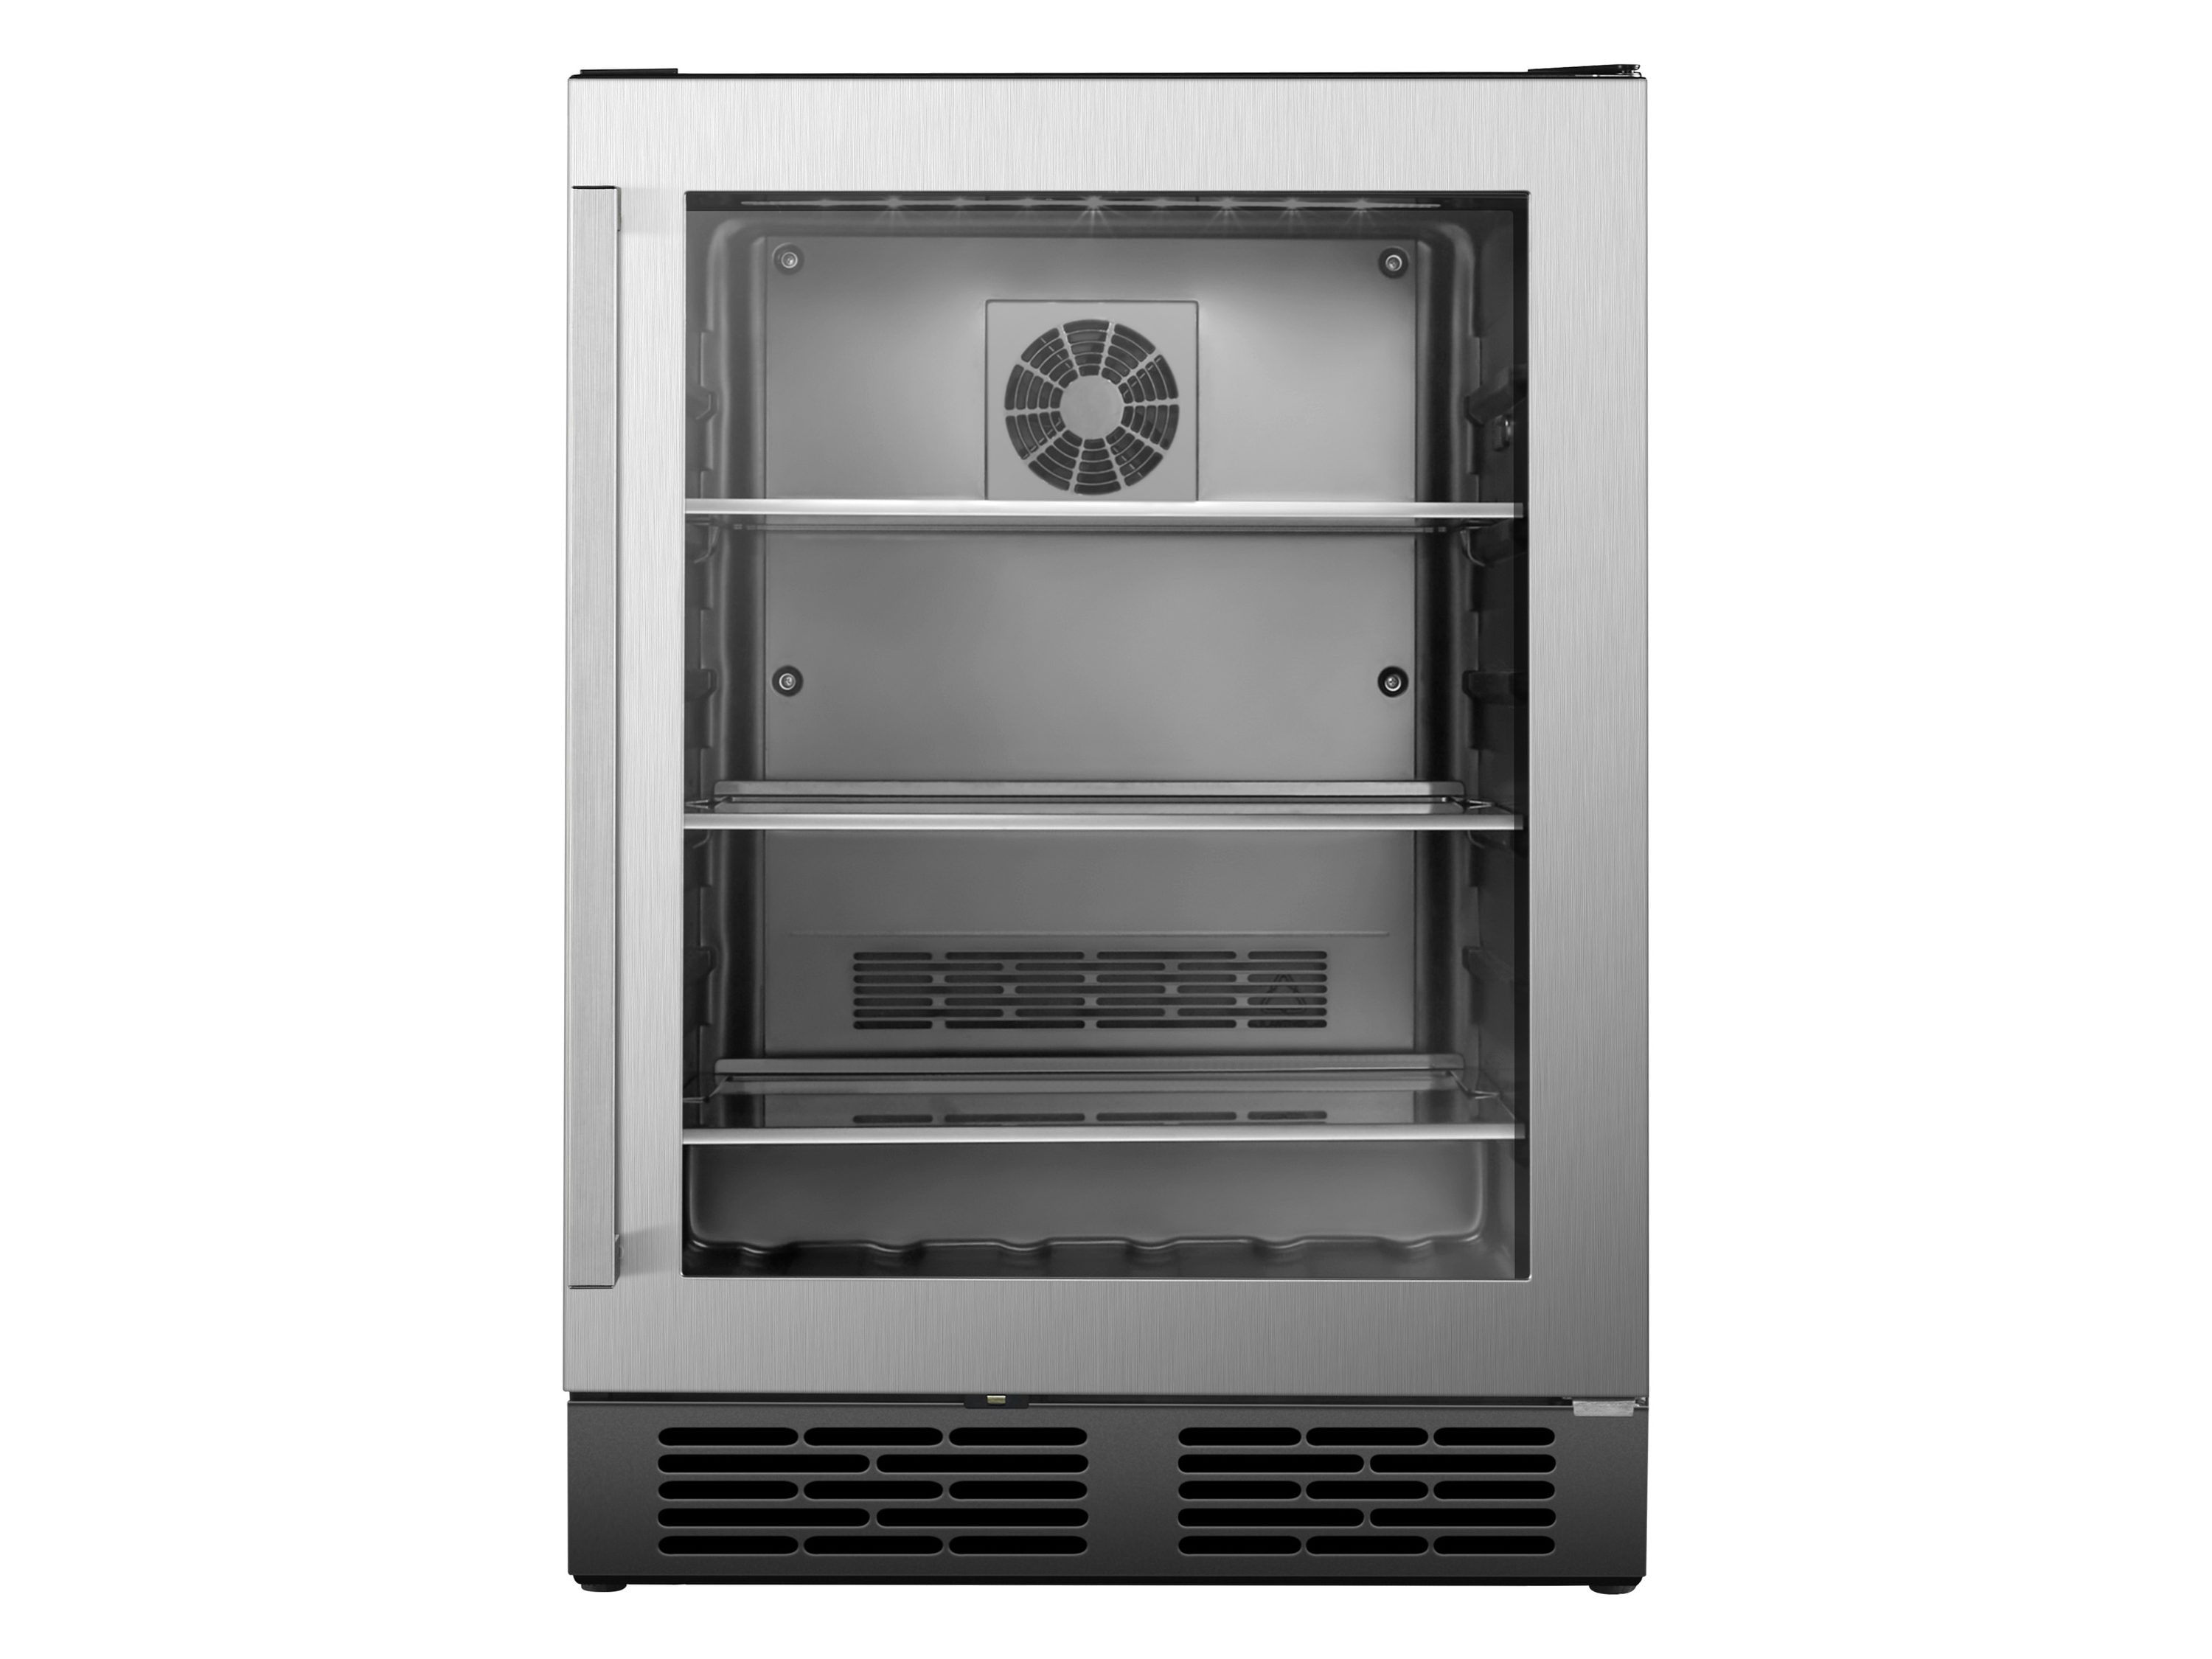 Hisense 23.43-in W 140-Can Capacity Stainless Steel Freestanding Beverage Refrigerator on Sale At Lowe's